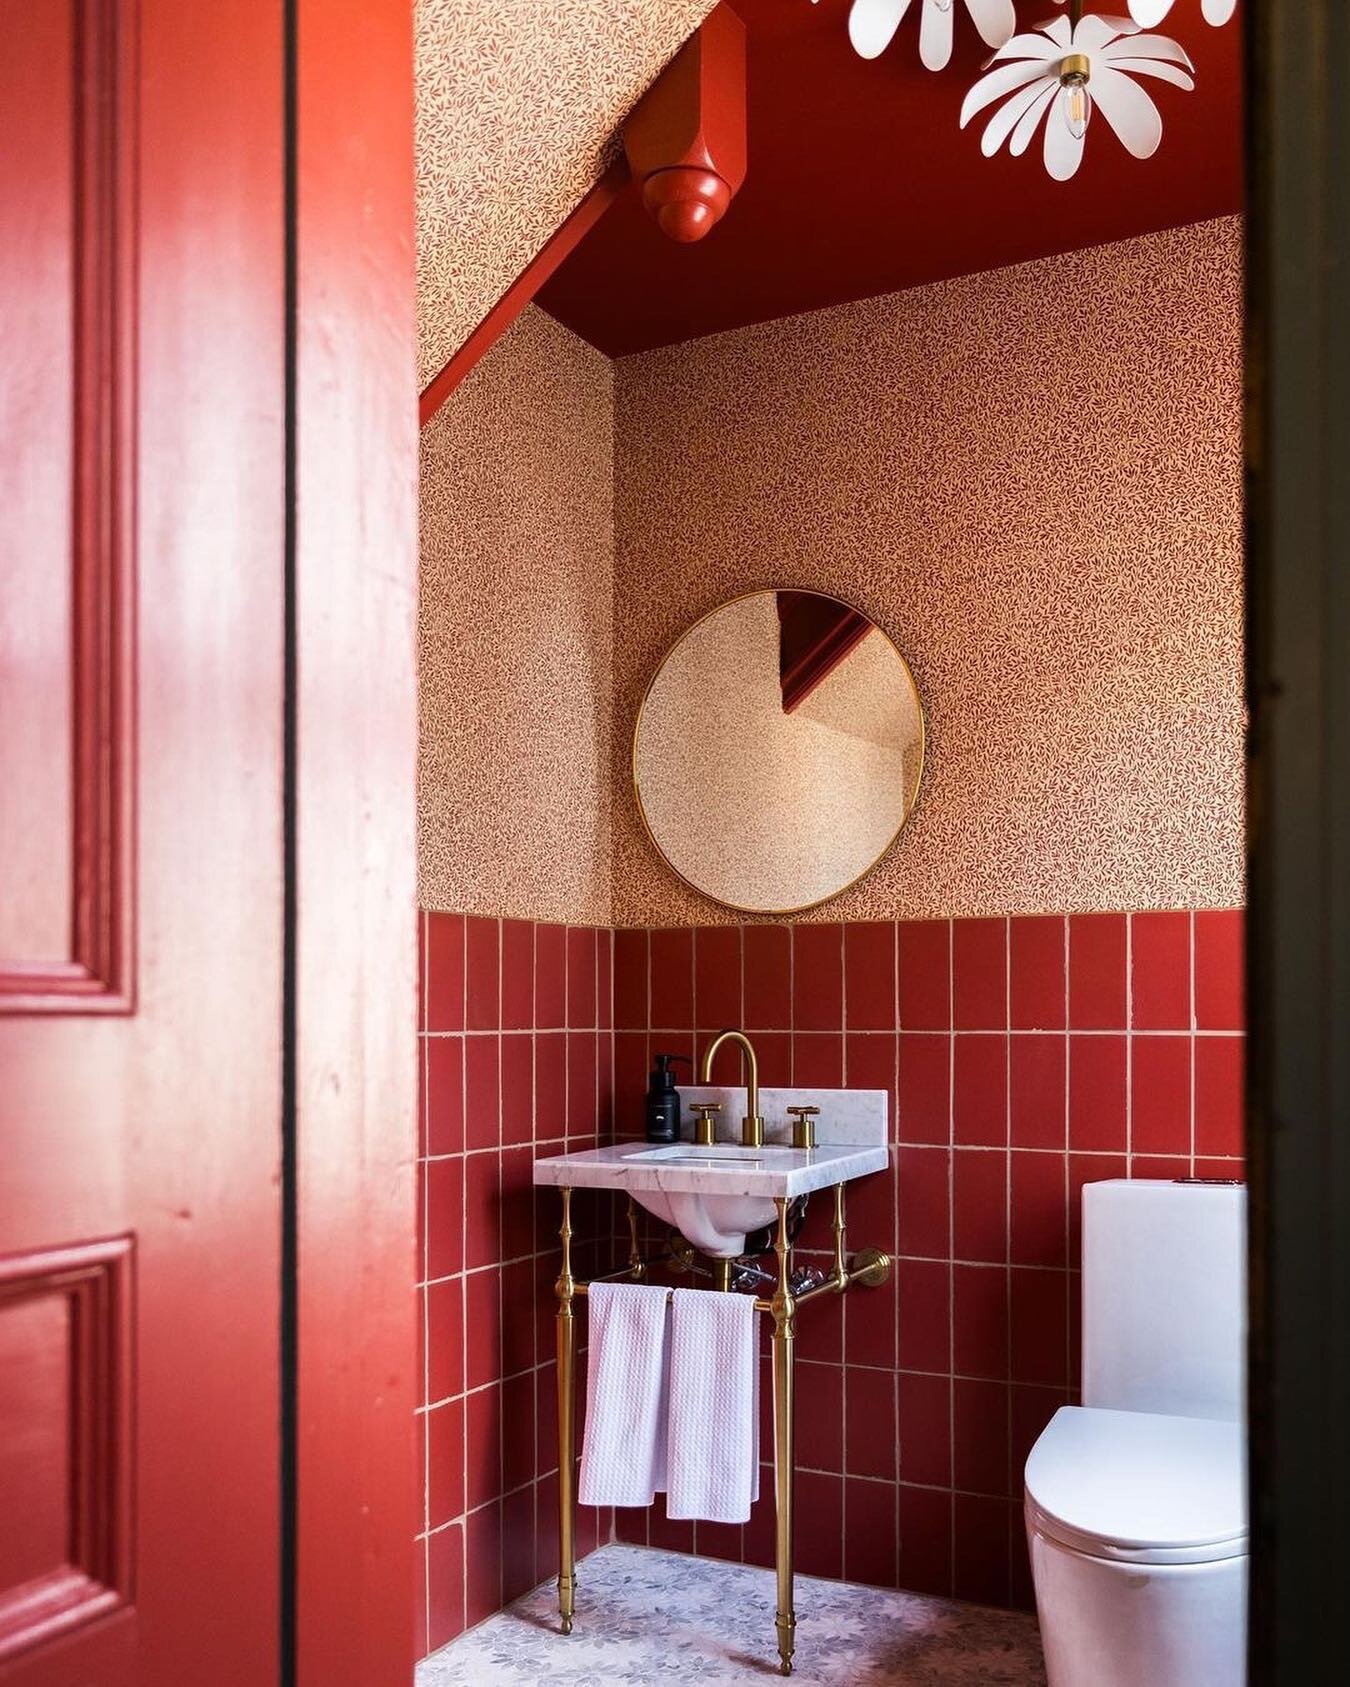 There is a shade of red for every room&hellip; &hearts;️ ❤️
⠀⠀⠀⠀⠀⠀⠀⠀⠀
Interior Design @susandrover
📸 #Repost from @janebrokenshire 
⠀⠀⠀⠀⠀⠀⠀⠀⠀
THIS 🙌 is a powder room! @dwellbysam @samdesigninc
⠀⠀⠀⠀⠀⠀⠀⠀⠀
&bull;
⠀⠀⠀⠀⠀⠀⠀⠀⠀
#designyourlife #stylelivesh